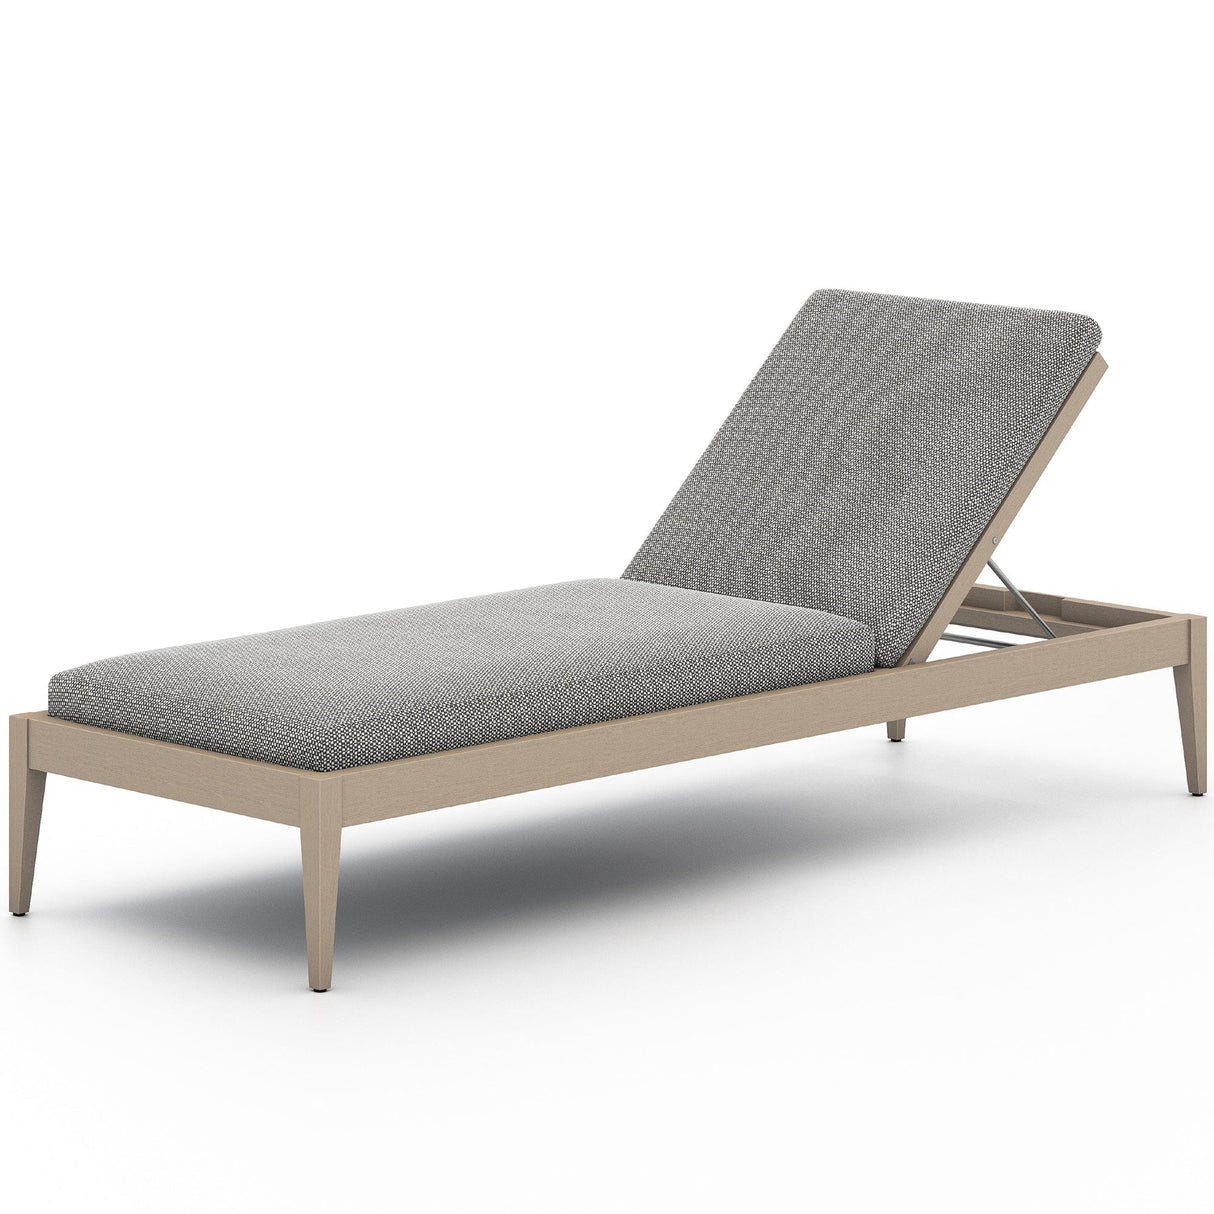 Four Hands Sherwood Outdoor Chaise Outdoor Furniture four-hands-226912-004